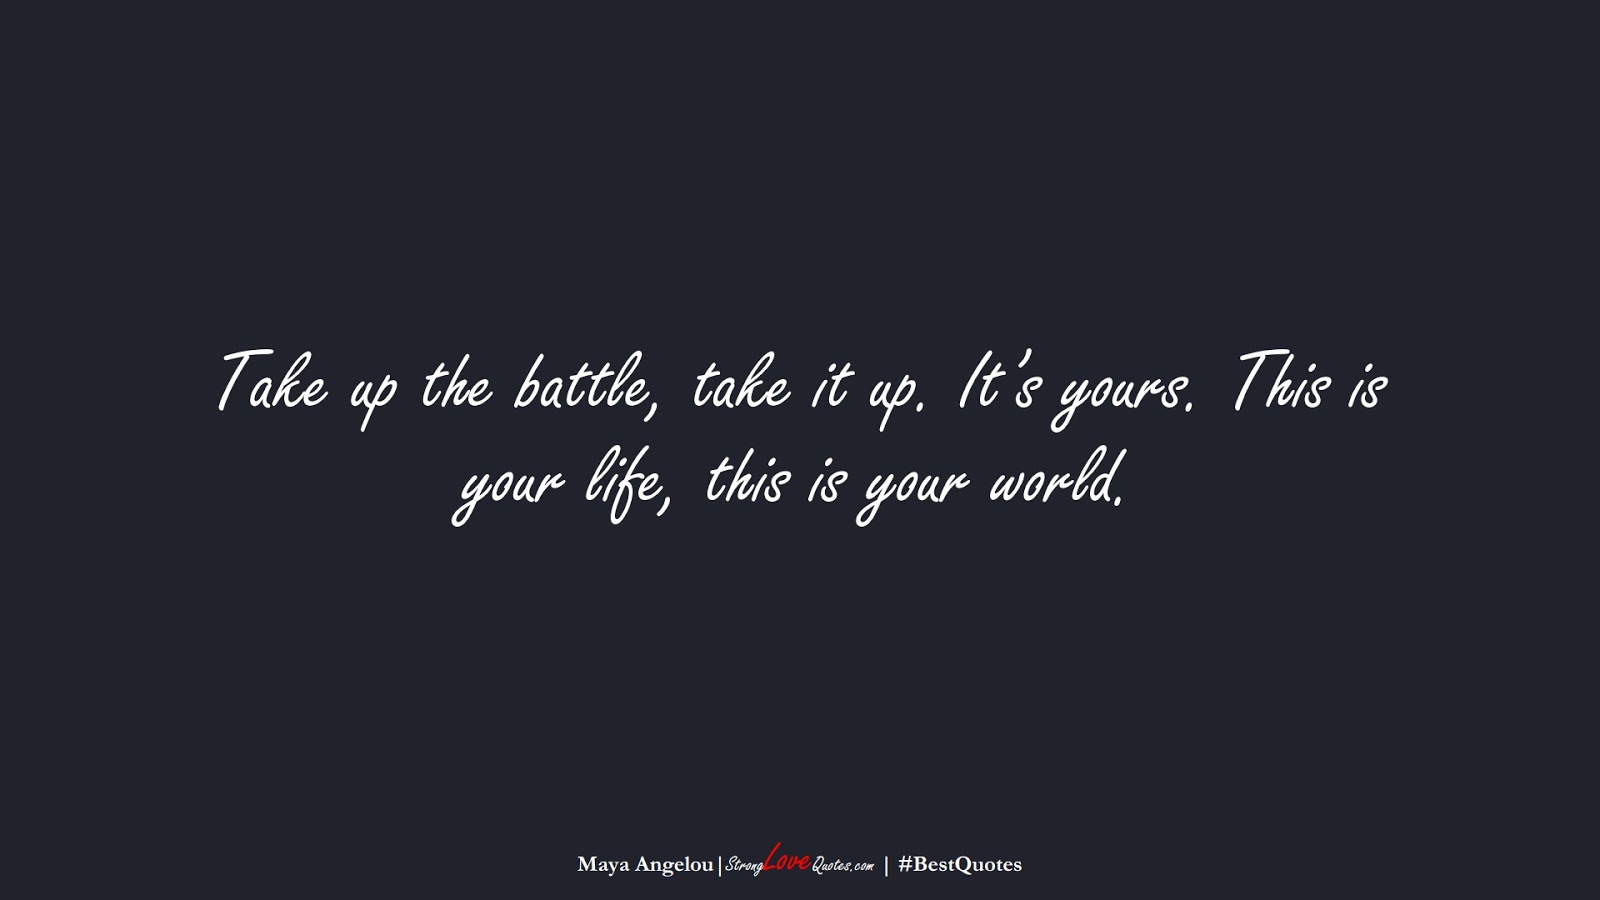 Take up the battle, take it up. It’s yours. This is your life, this is your world. (Maya Angelou);  #BestQuotes